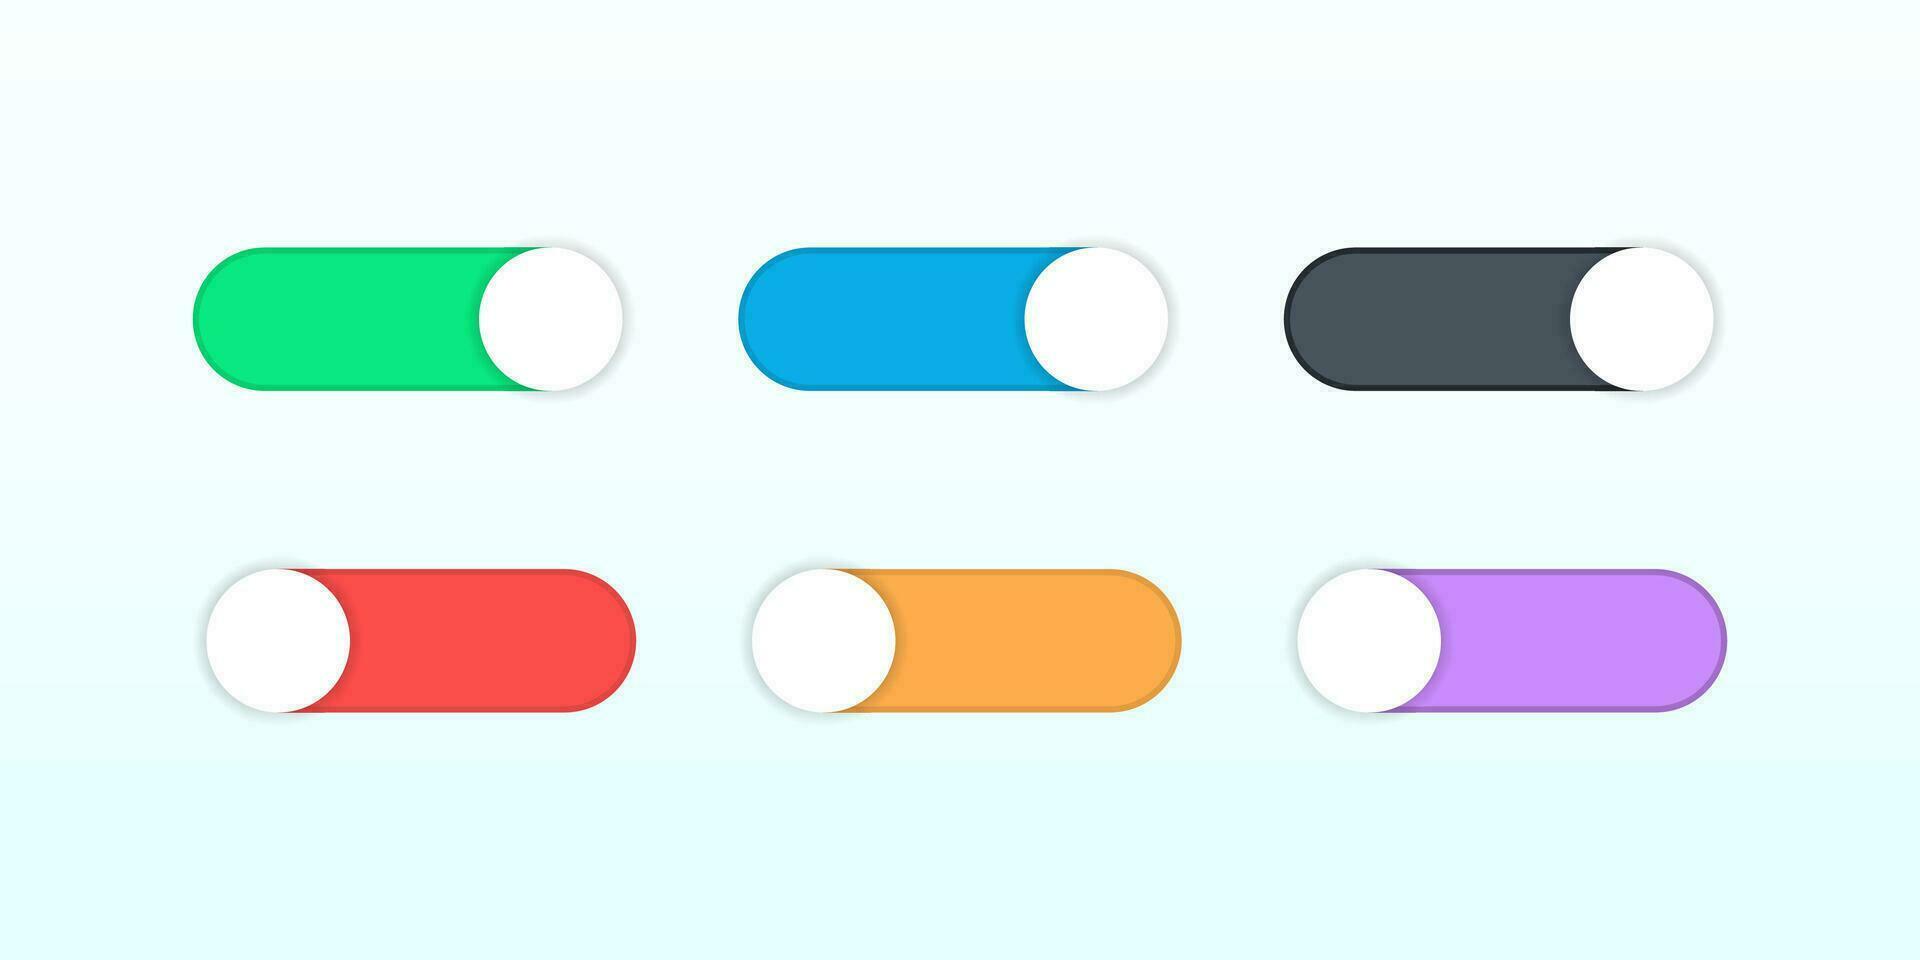 On and off switch toggle. Shutdown switcher button. Colorful set of round toggle. Active and inactive slider controller. Isolated on and off toggle on white background. EPS 10. vector